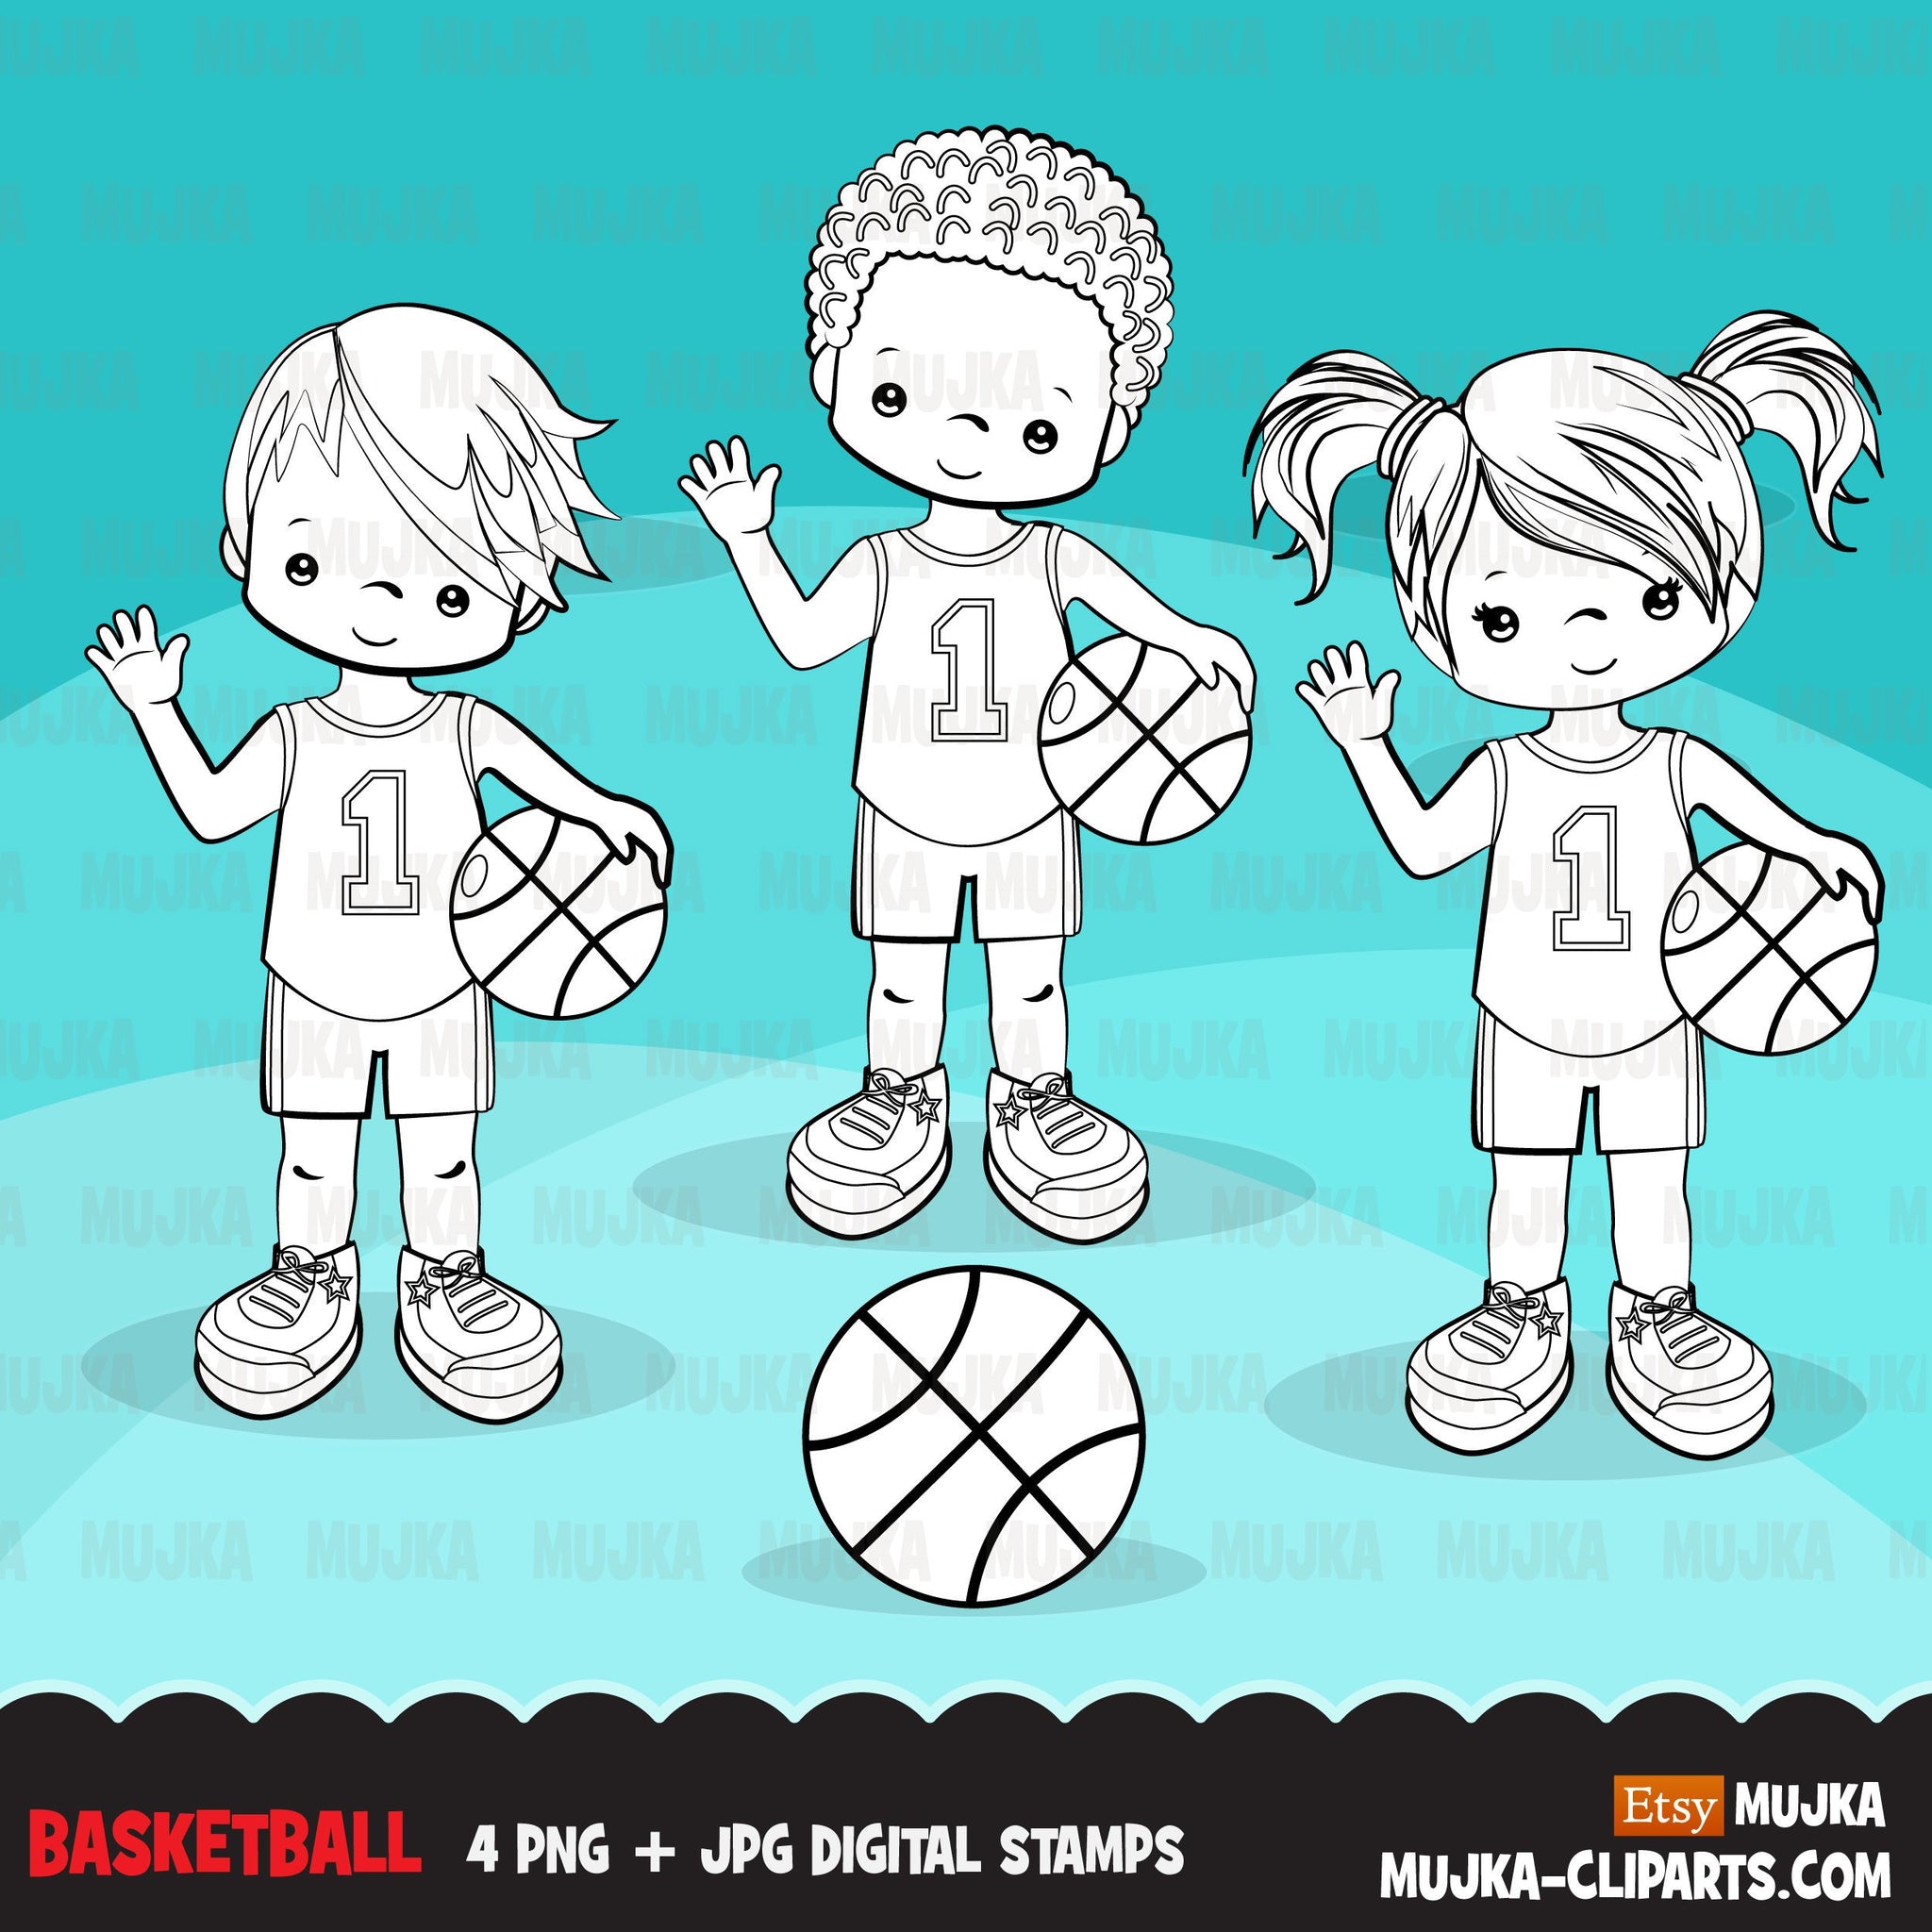 Basketball players Digital Stamps, Sports Graphics, B&W clip art outline